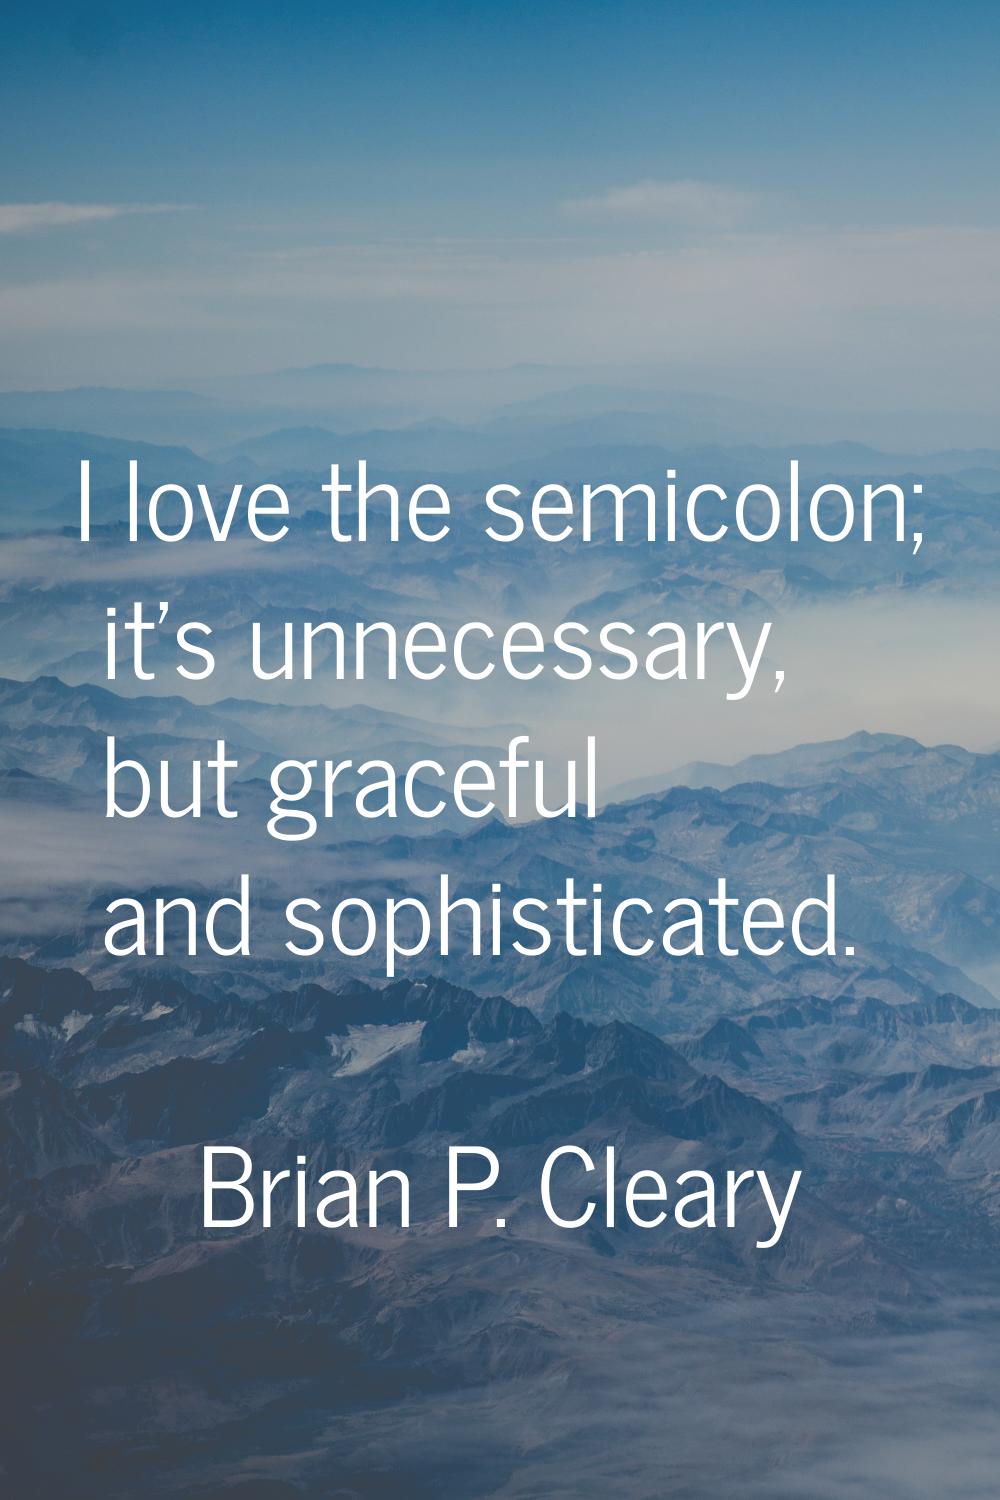 I love the semicolon; it's unnecessary, but graceful and sophisticated.